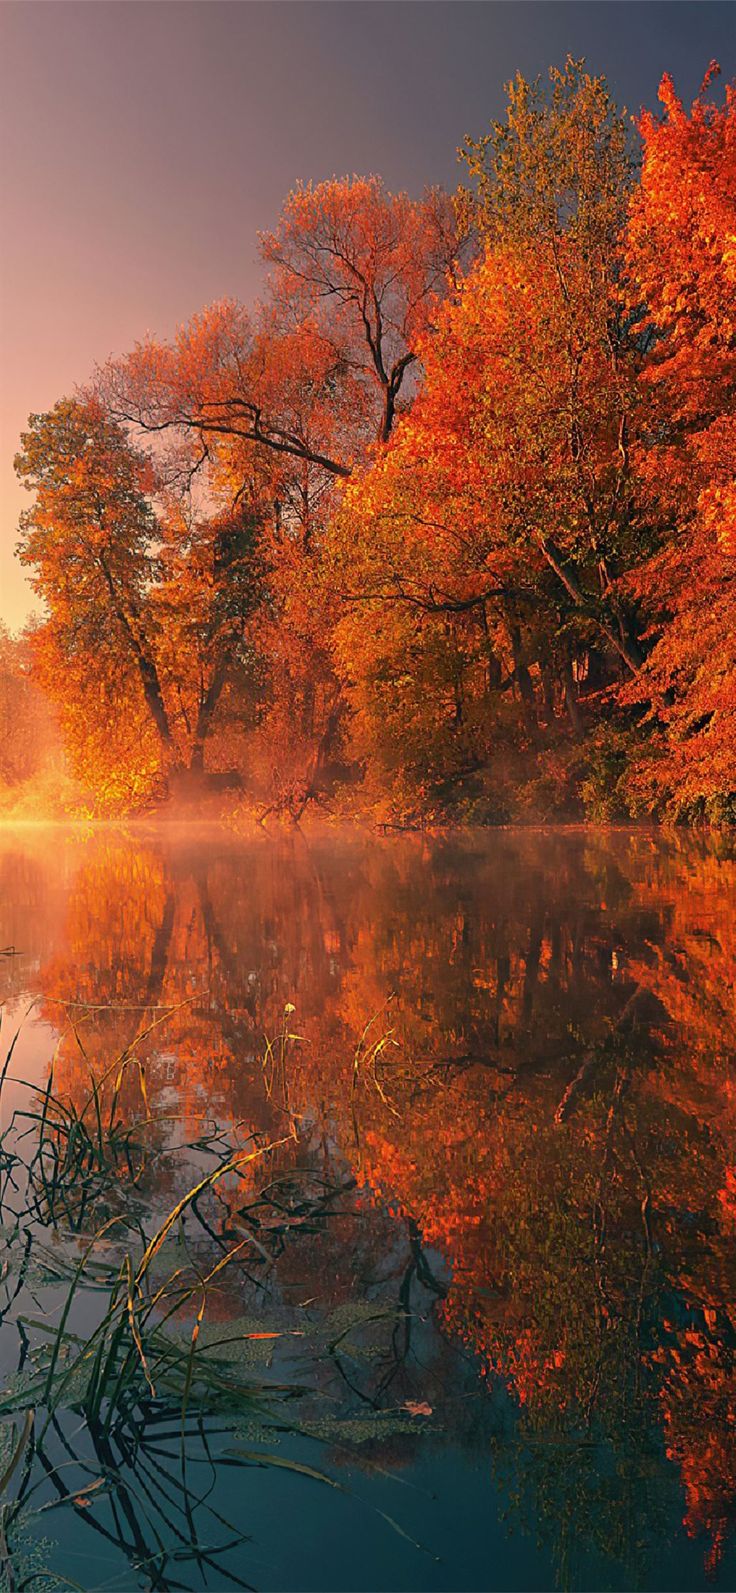 Autumn Trees iPhone Lake Wallpapers - Wallpaper Cave